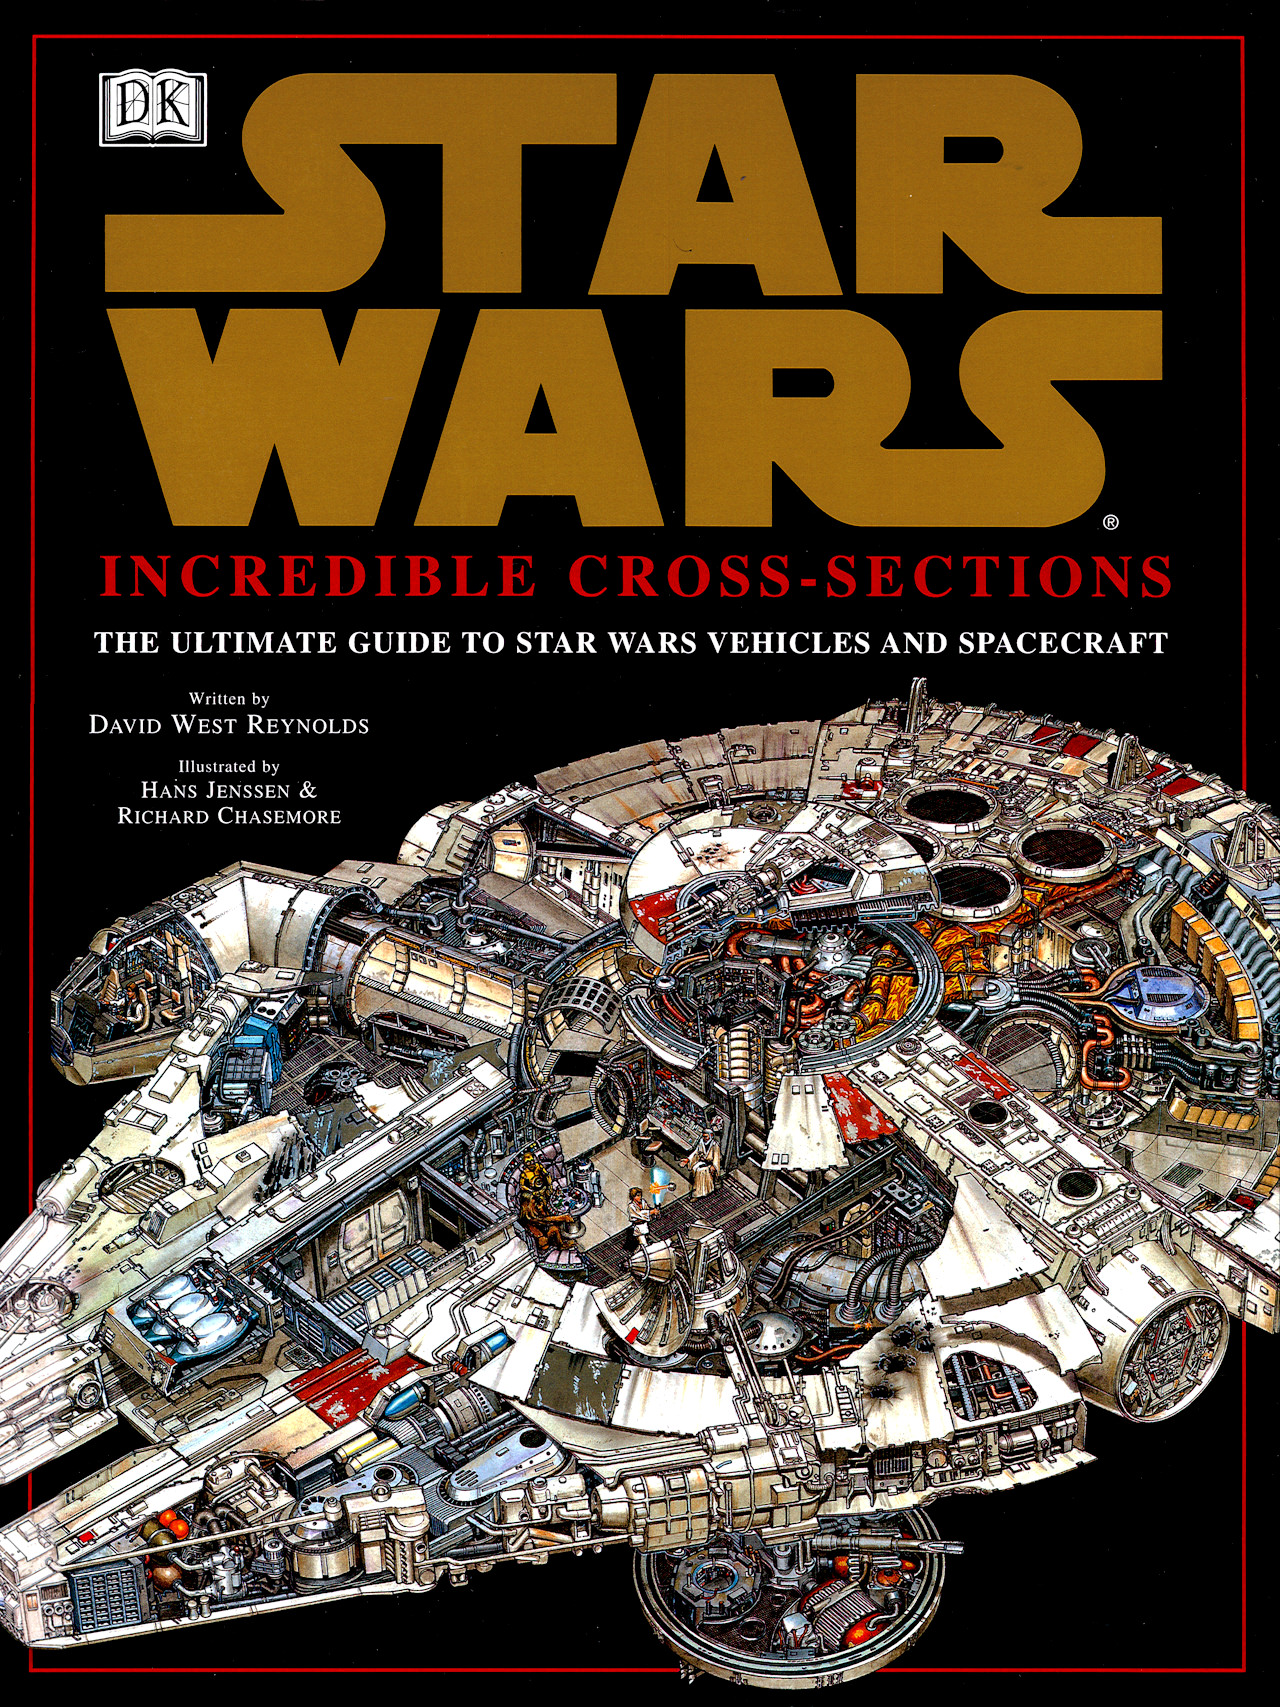 Star Wars: Incredible Cross-Sections